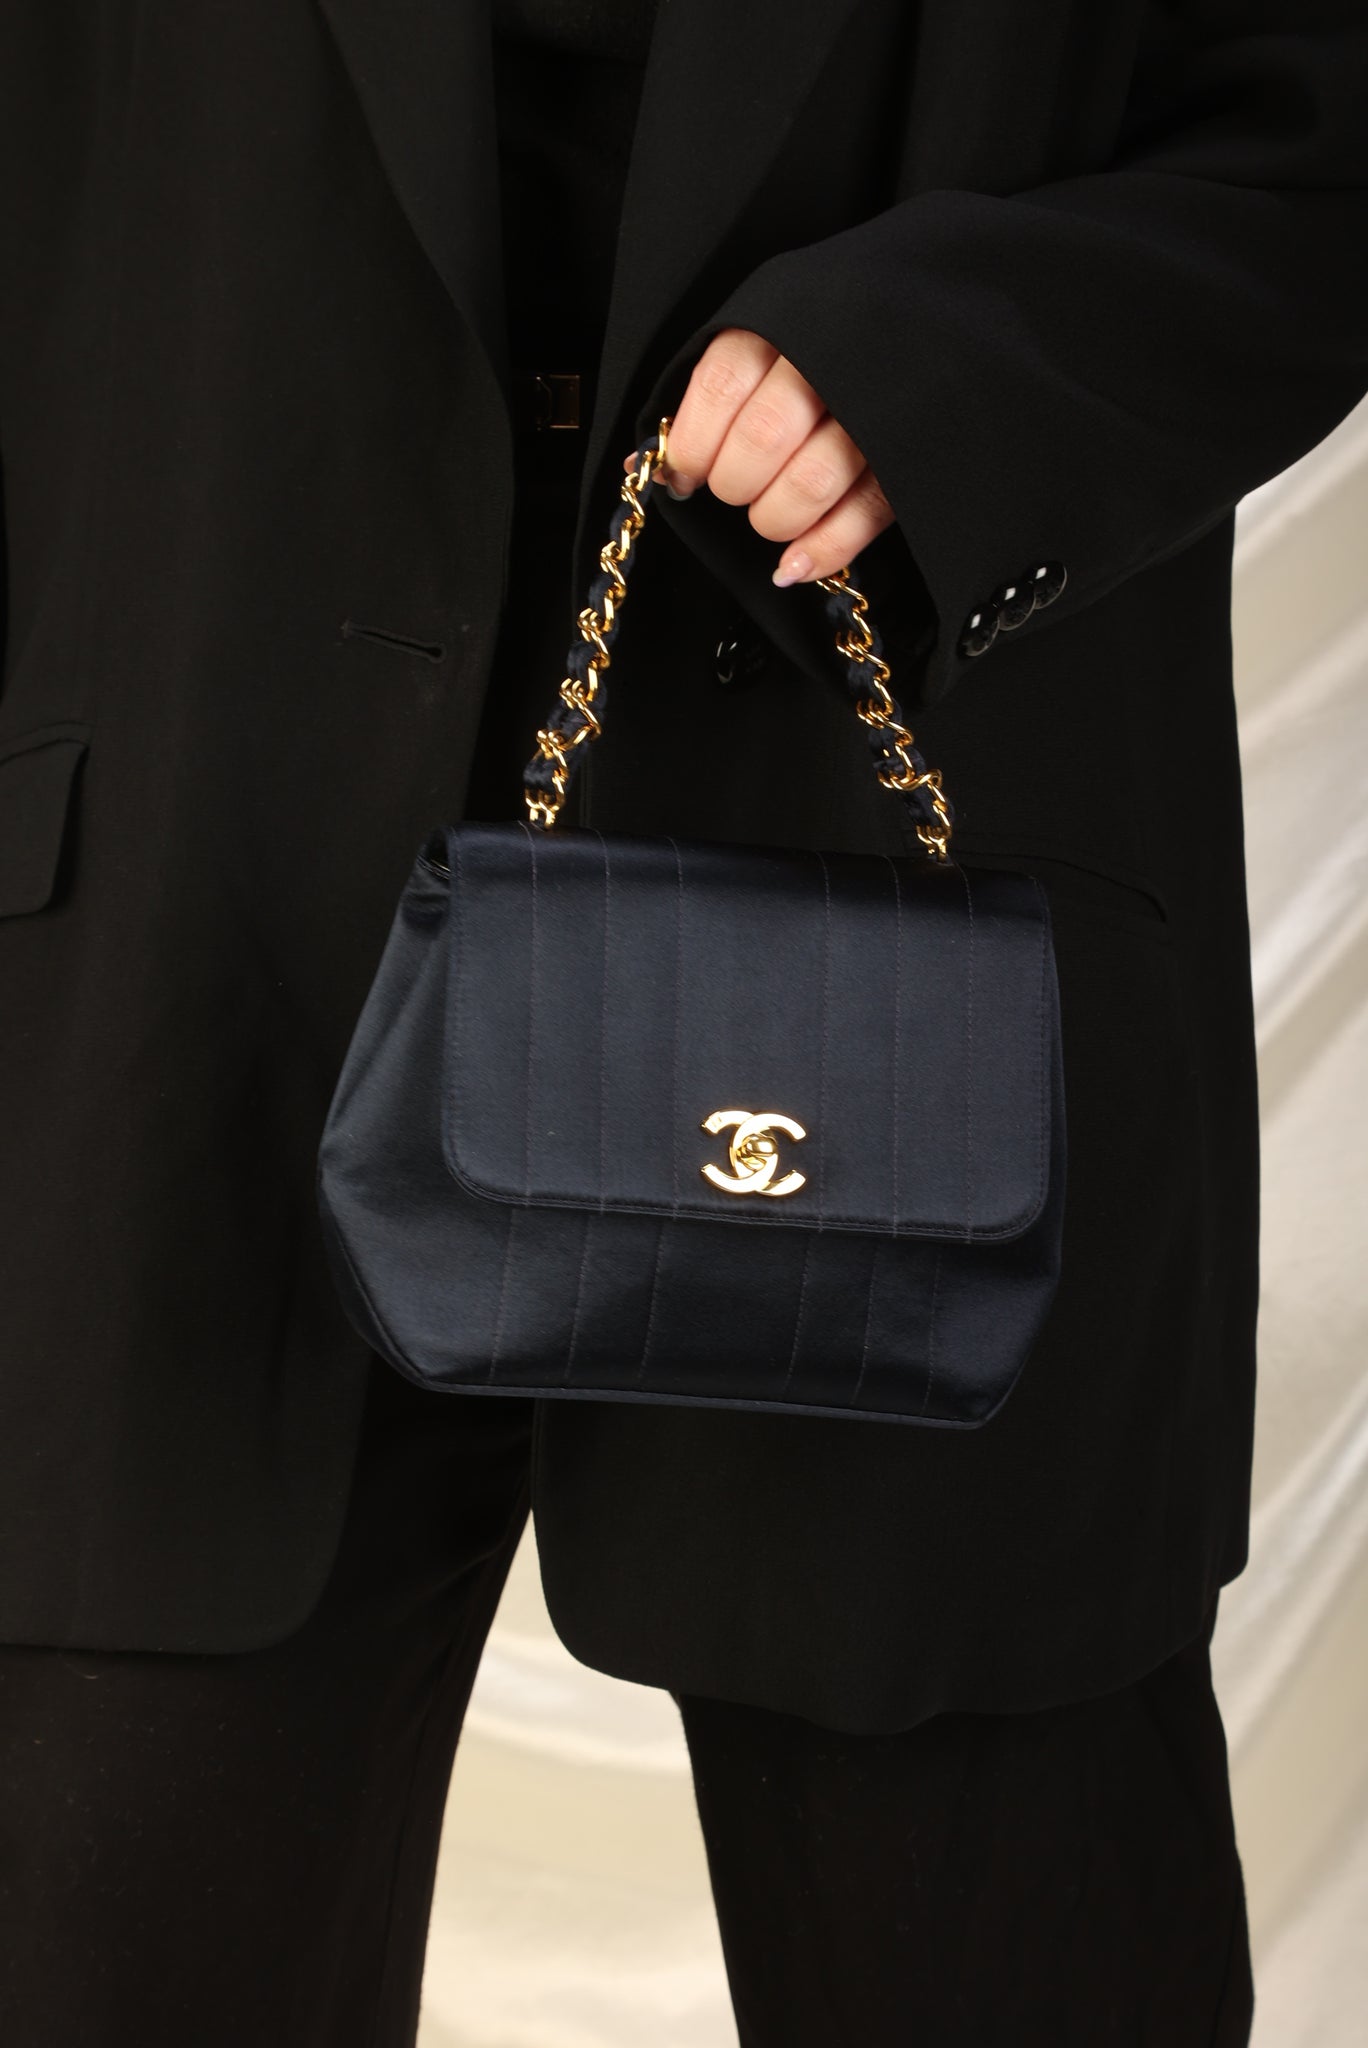 Extremely Rare Chanel Satin Top Handle